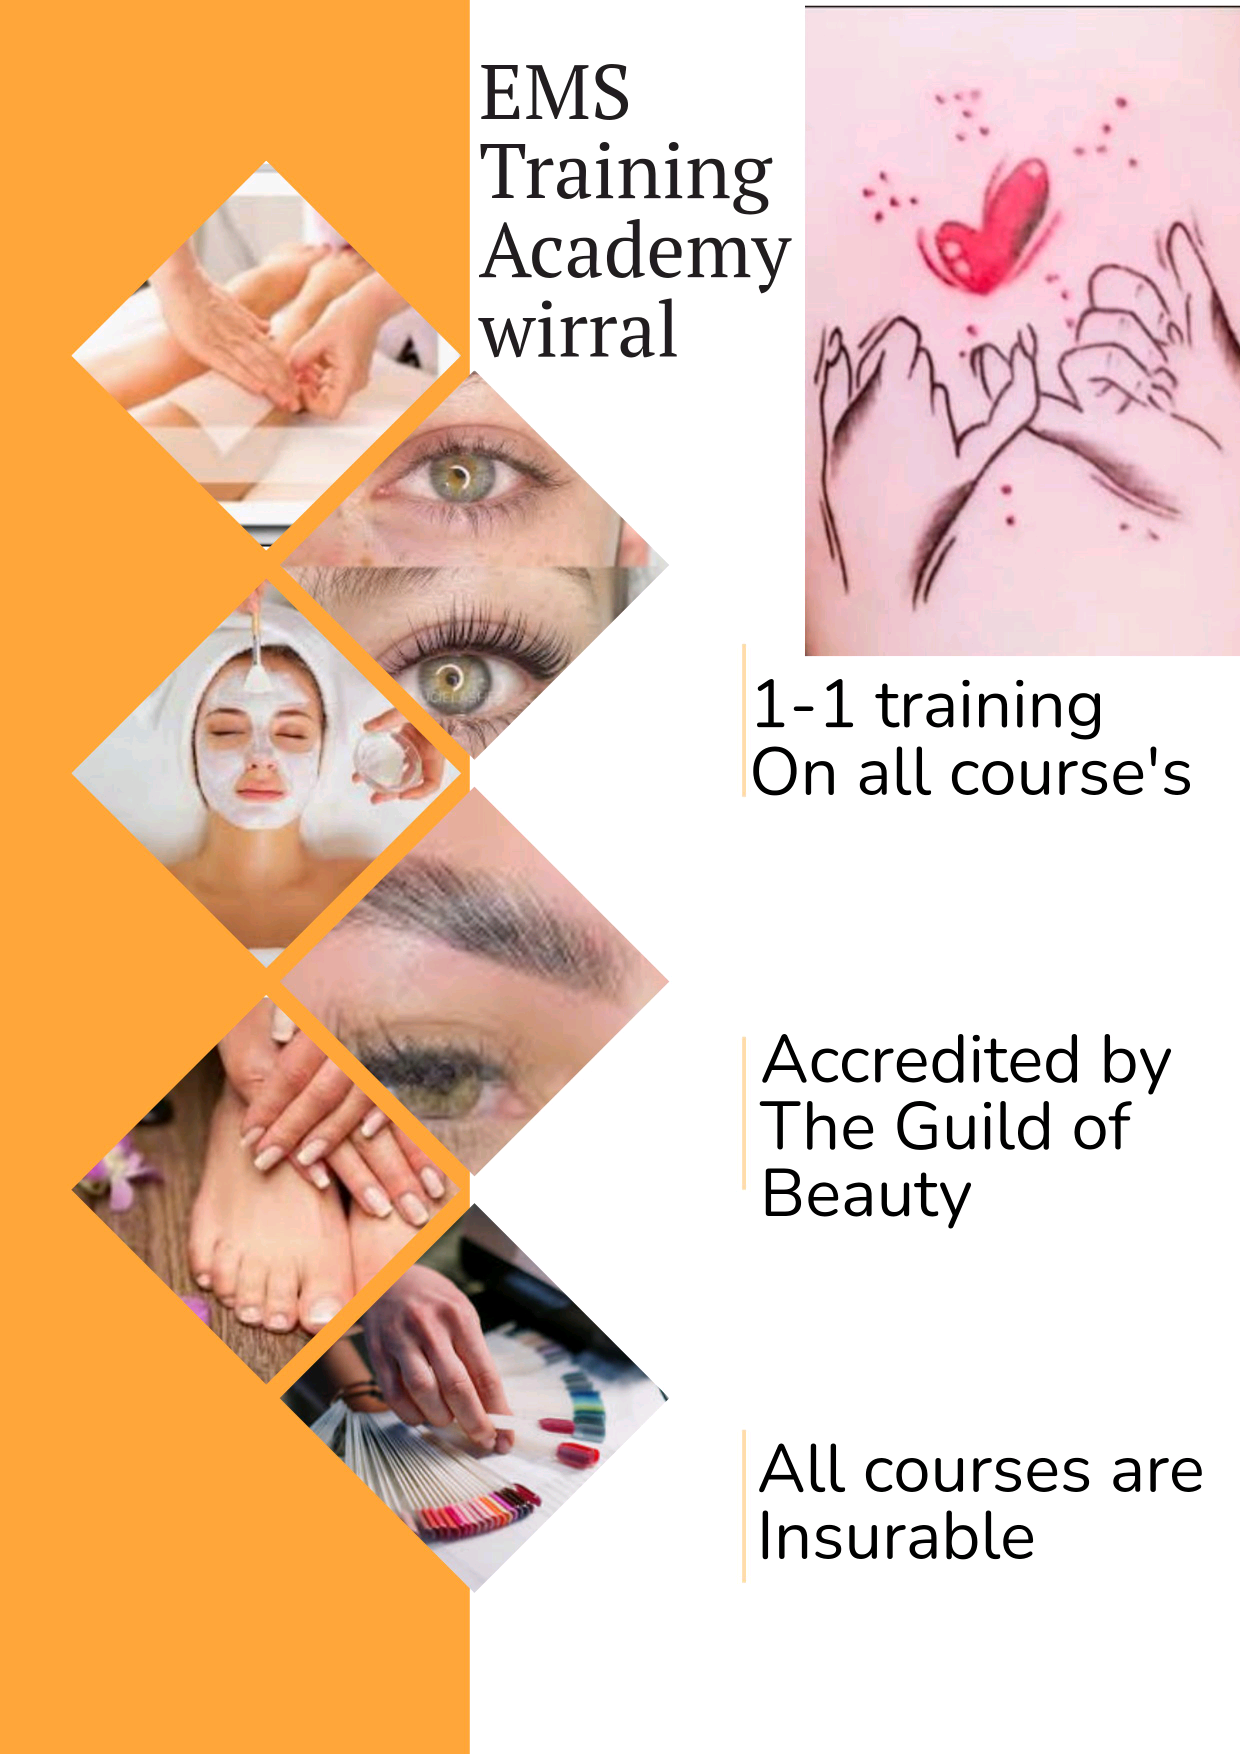 EMS Nails And Beauty Wirral /EMS Nails And Beauty Wirral Training Academy